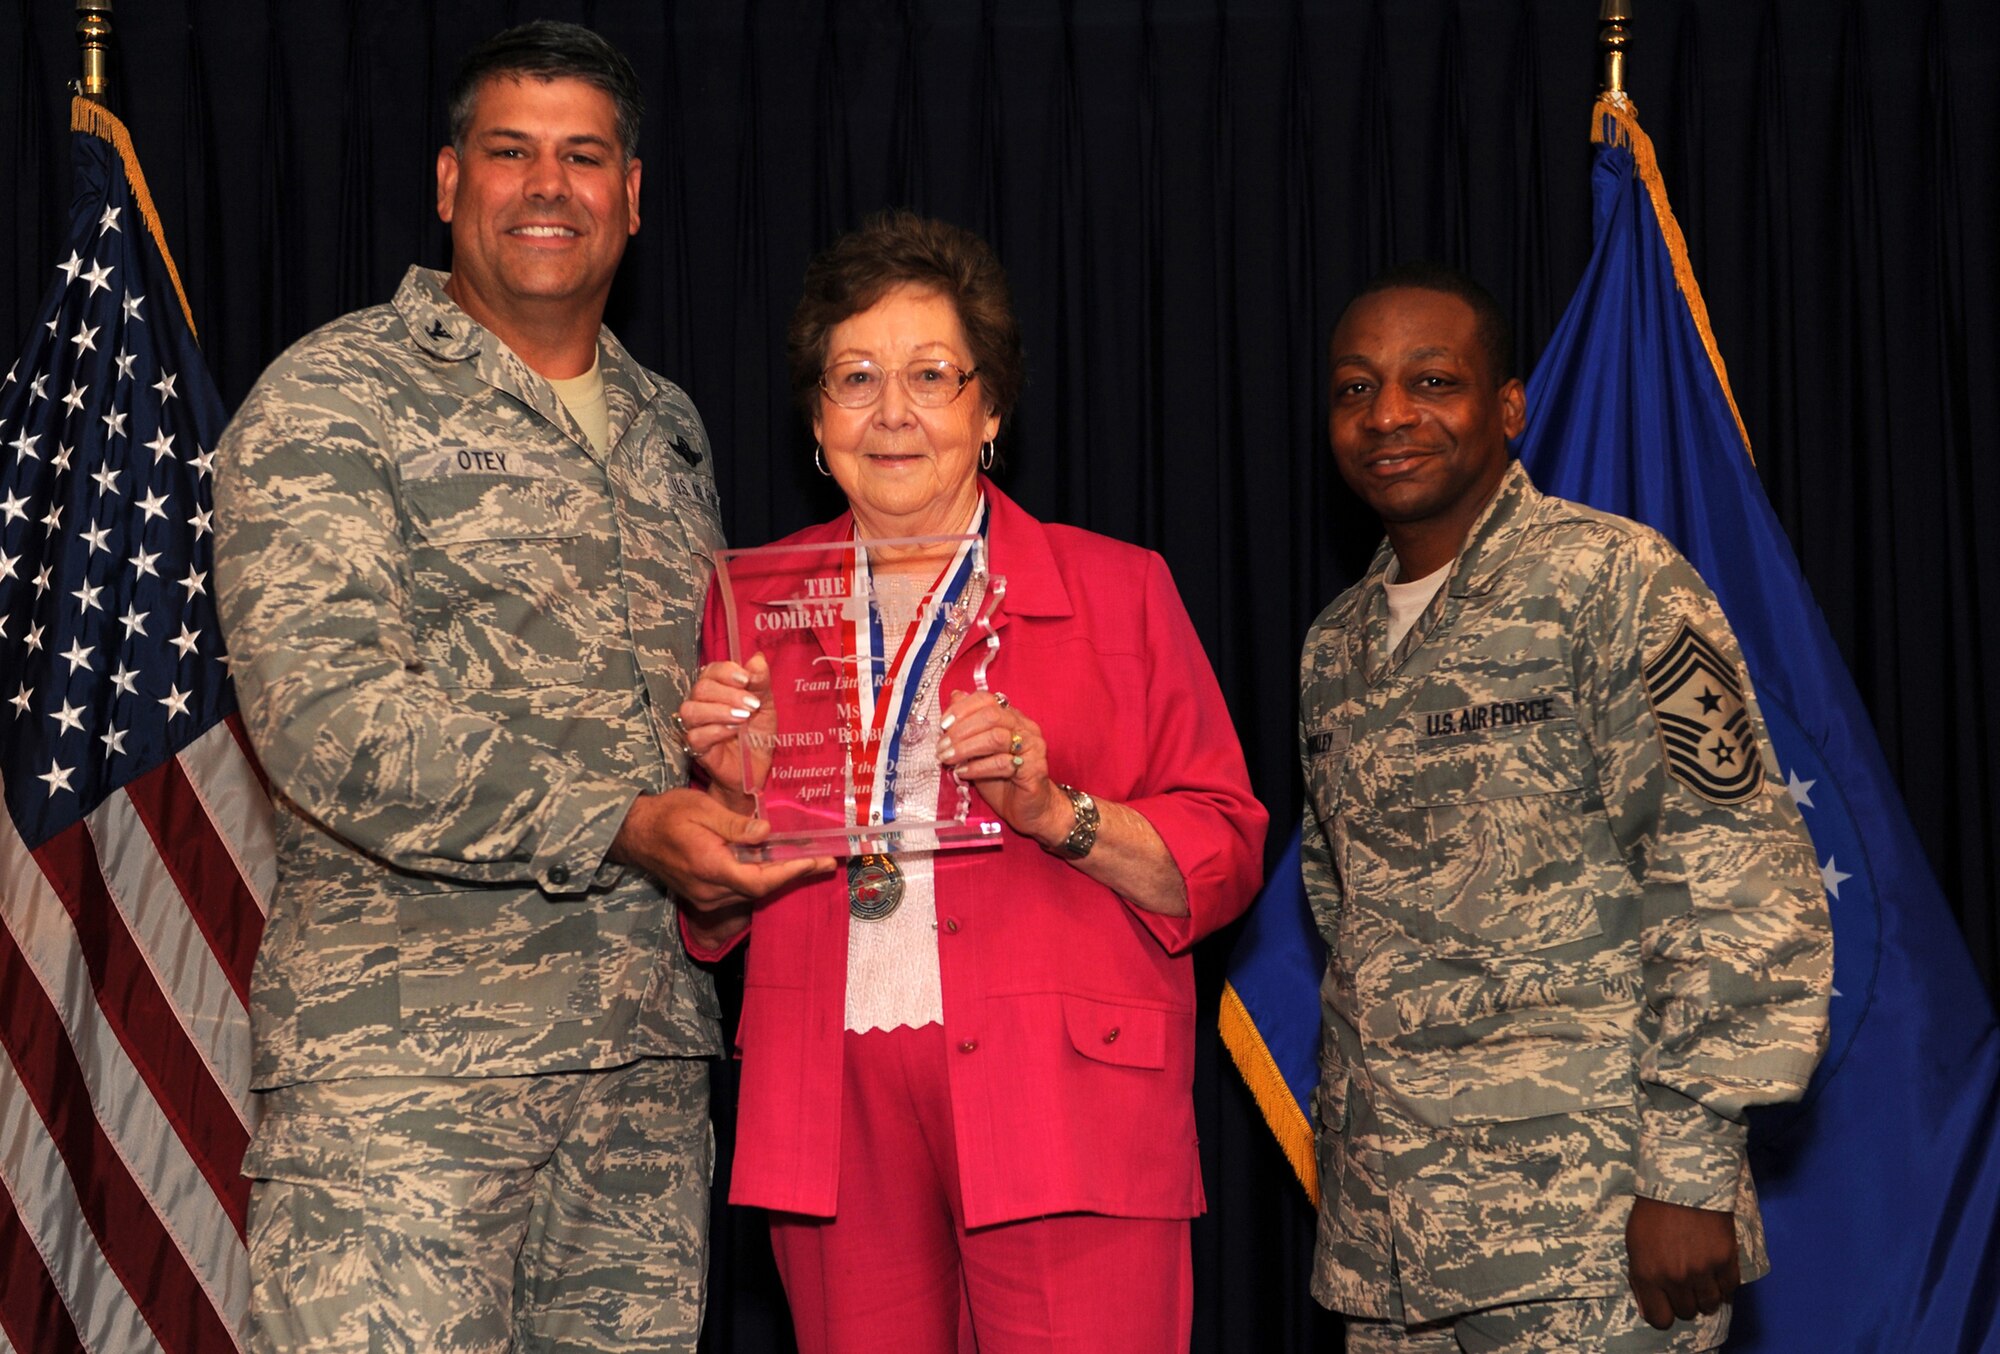 Col. Greg Otey, 19th Airlift Wing commander, and Chief Master Sgt. Anthony Brinkley, 19th Airlift Wing command chief, presents  Winifred Evans, 19th Medical Support Squadron, a quarterly award for volunteer of the quarter at Little Rock Air Force Base, Ark. July 30. (U. S. Air Force photo by Senior Airman Jim Araos)